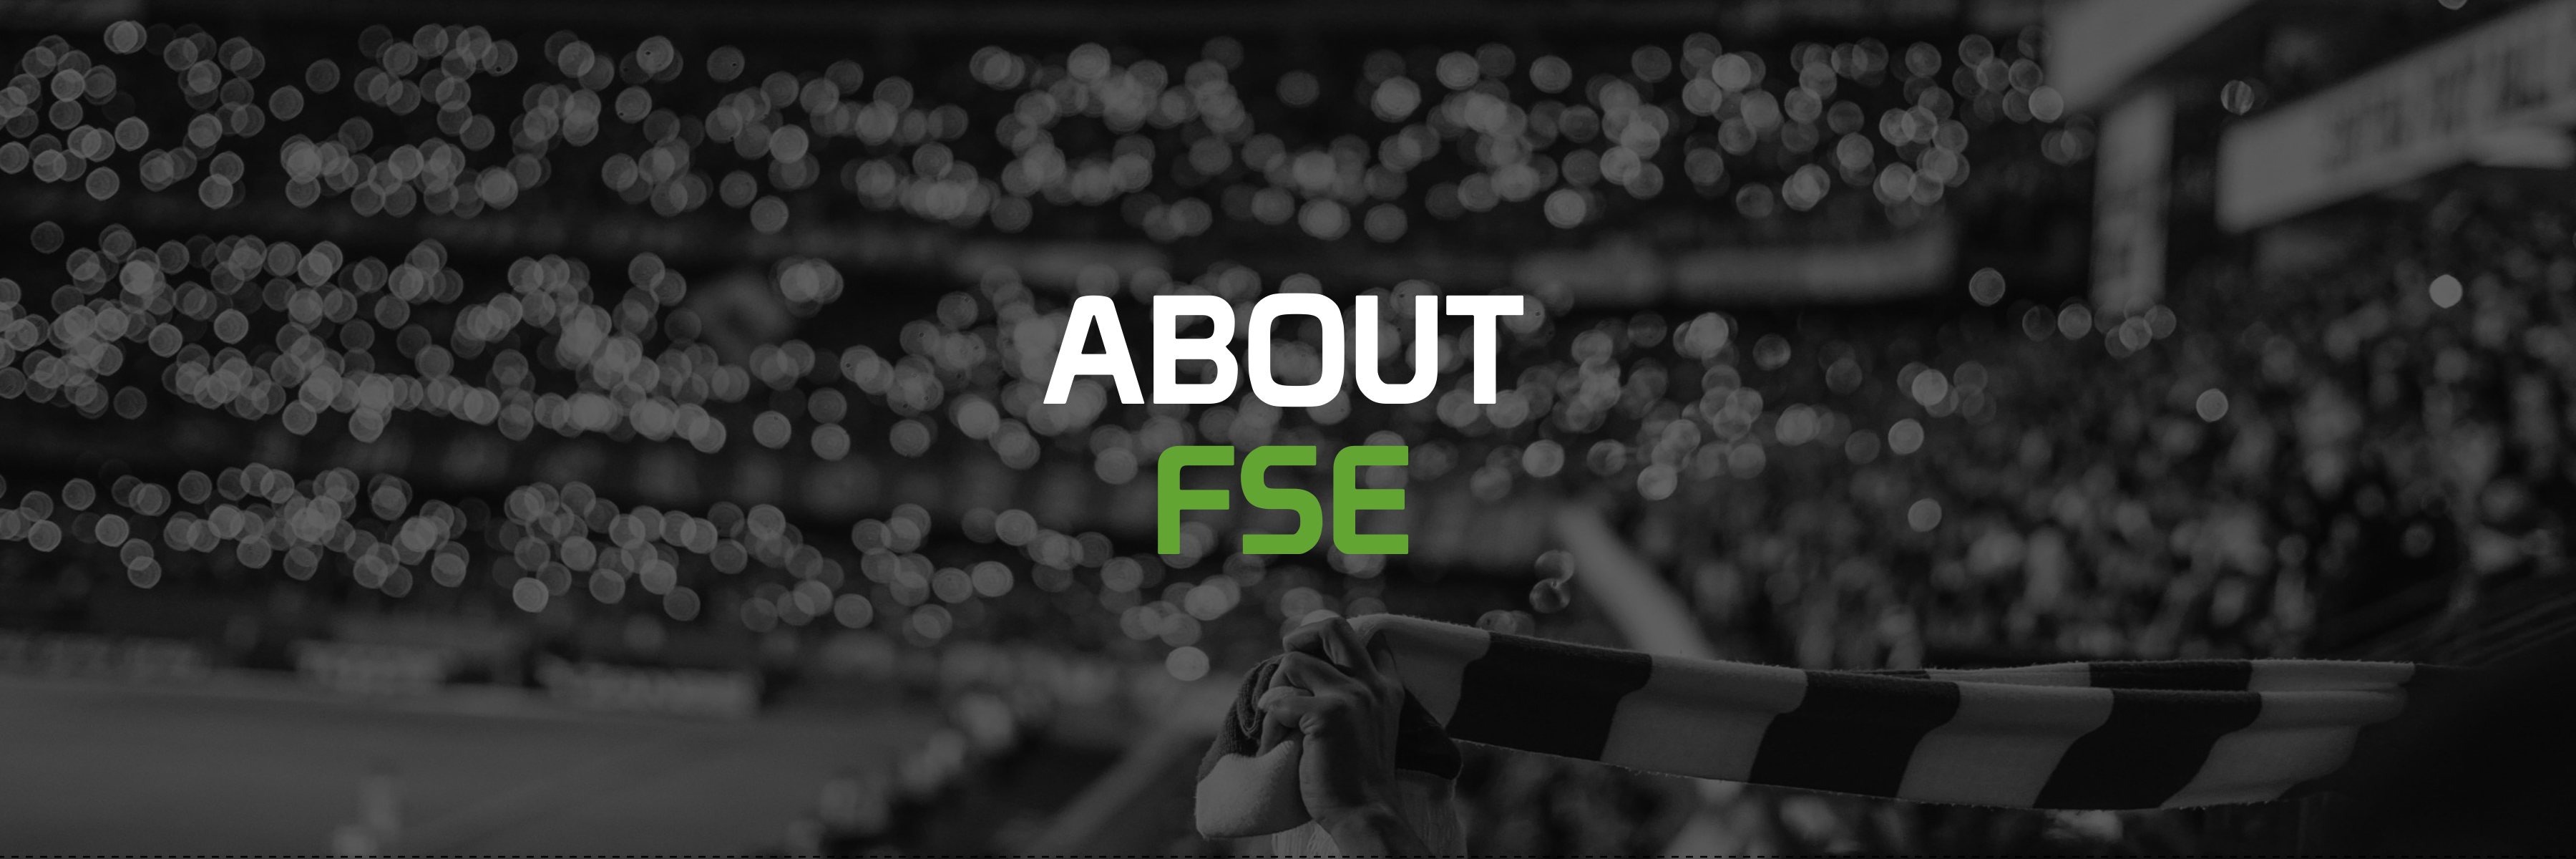 About FSE Banner Image - Photo by Emerson Vieira